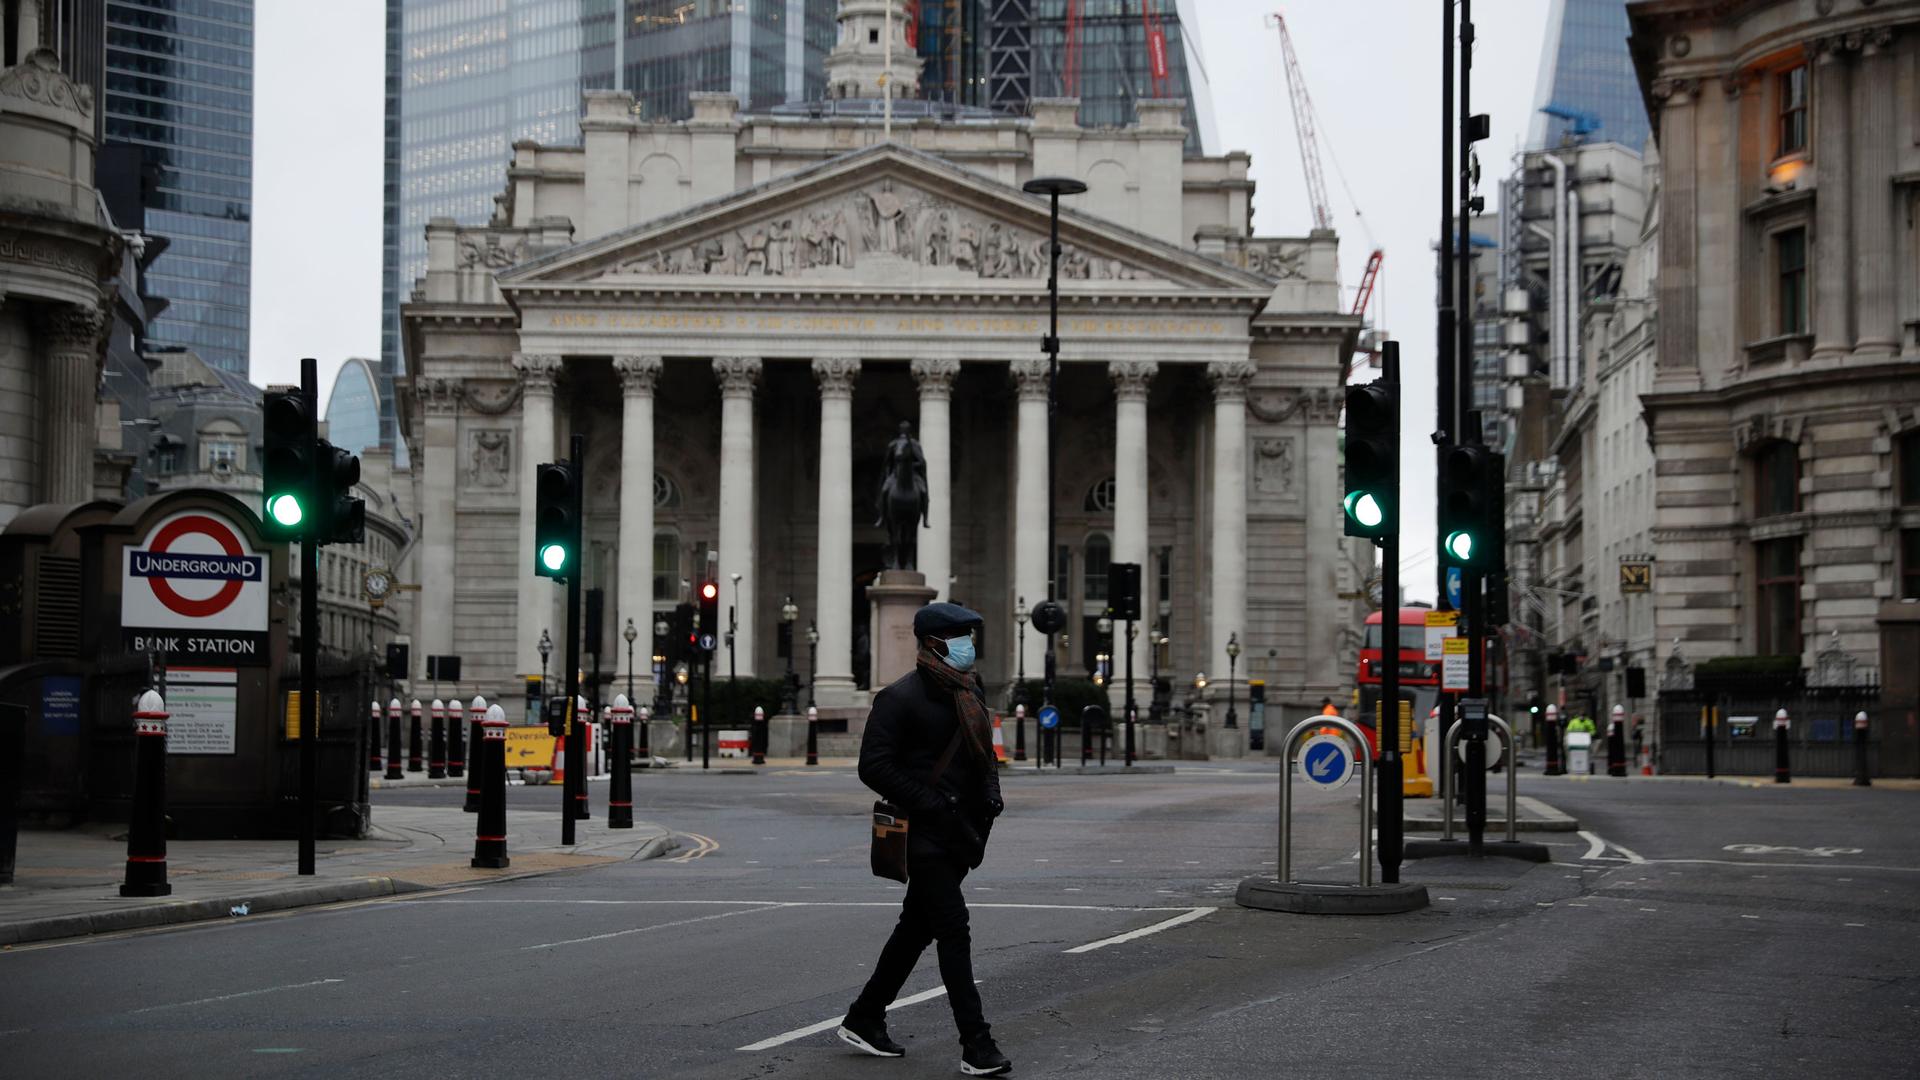 A man is shown with his hands in his coat pockets and wearing a face mask crossing a the street with England's Royal Exchange is in the distance.